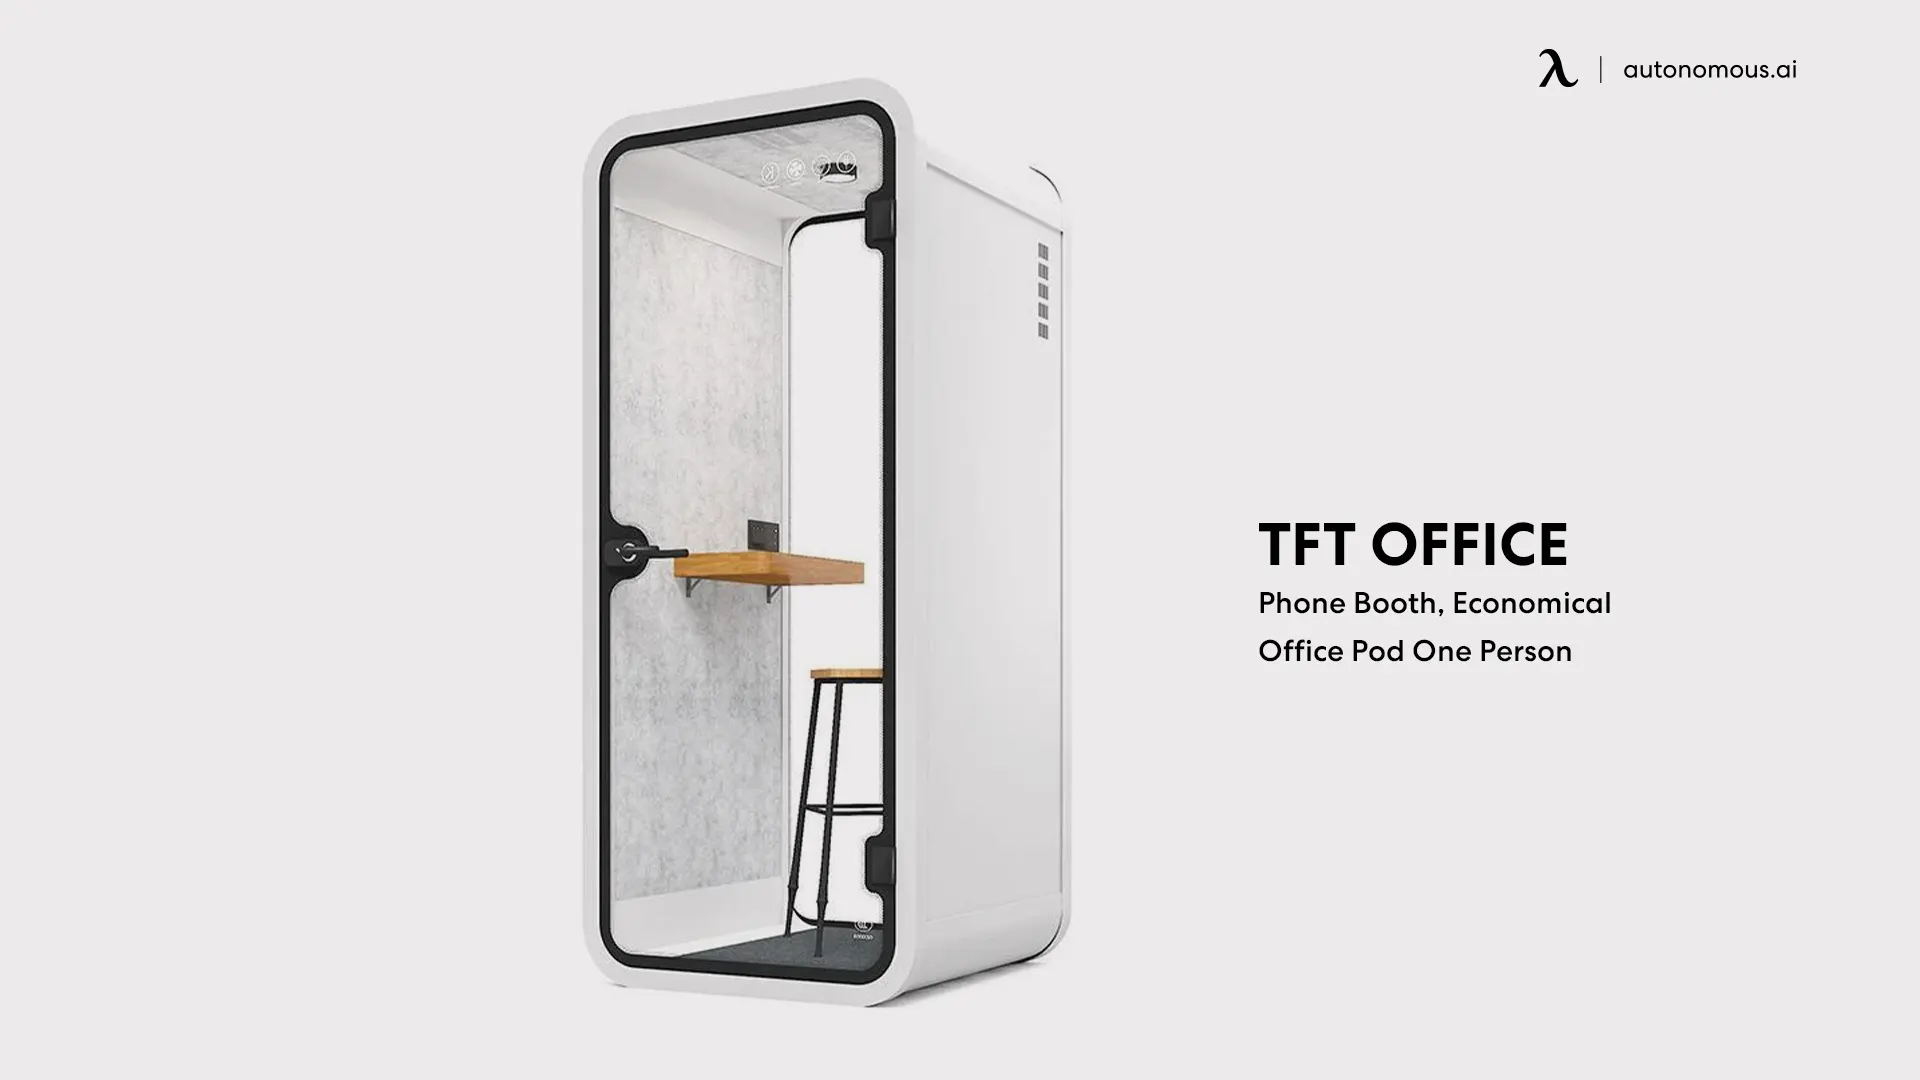 TFT Office Phone Booth, Economical Office Pod One Person